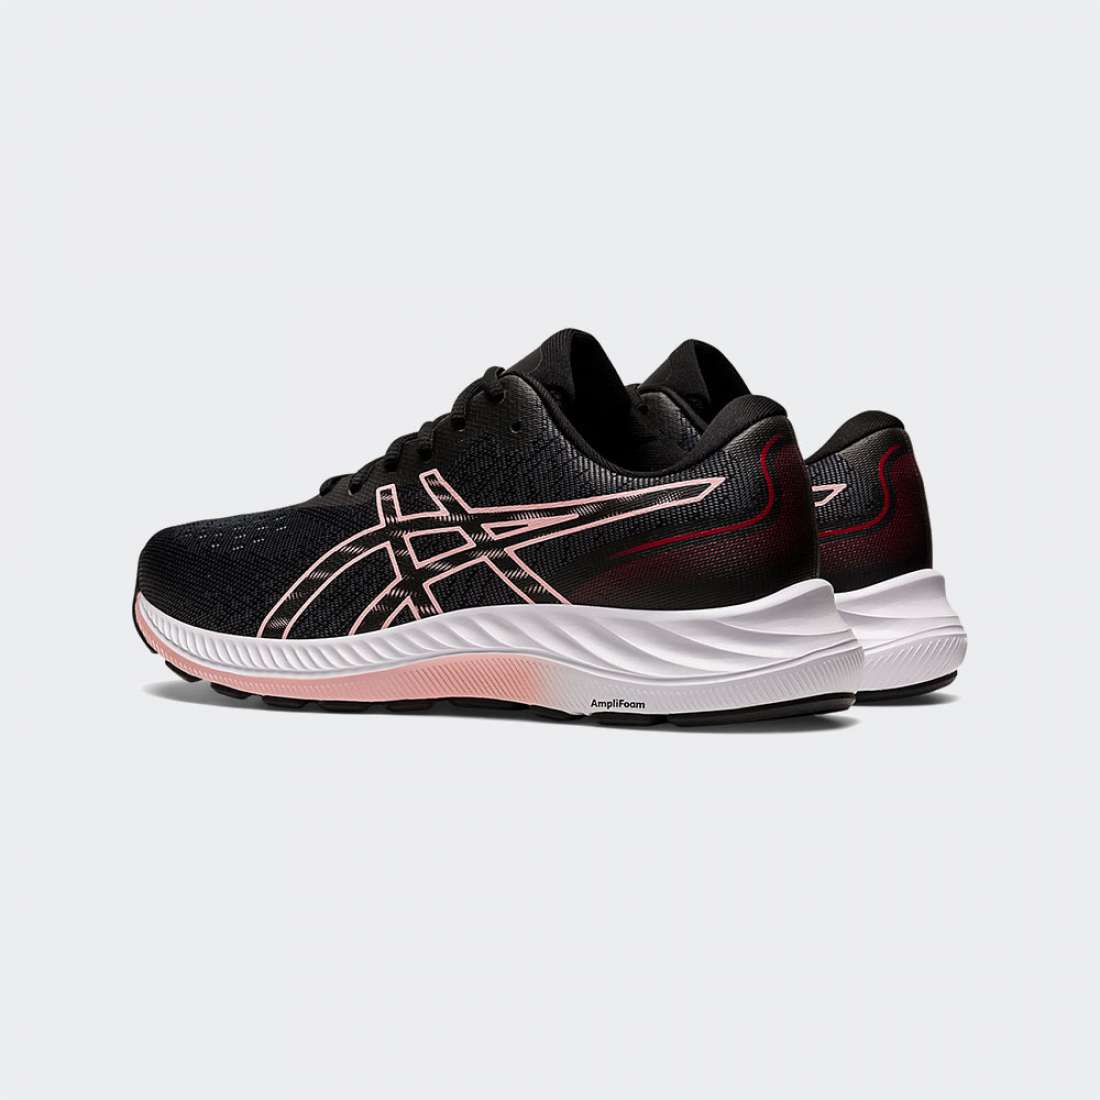 ASICS GEL EXCITE 9 W BLACK/FROSTED ROSE